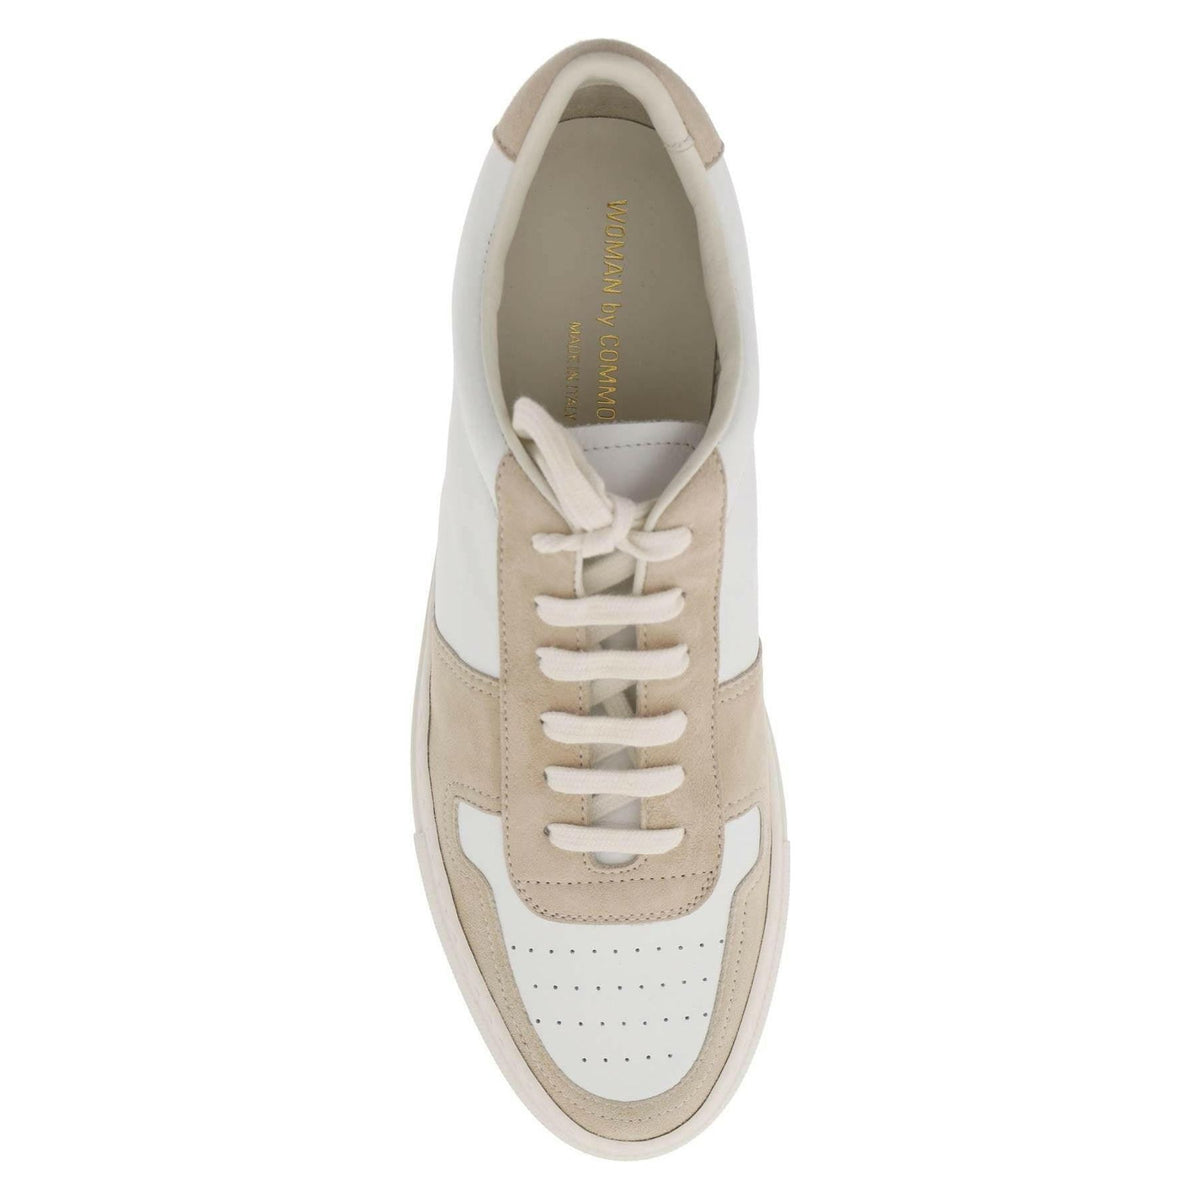 COMMON PROJECTS - BBall Nappa Leather Sneakers - JOHN JULIA